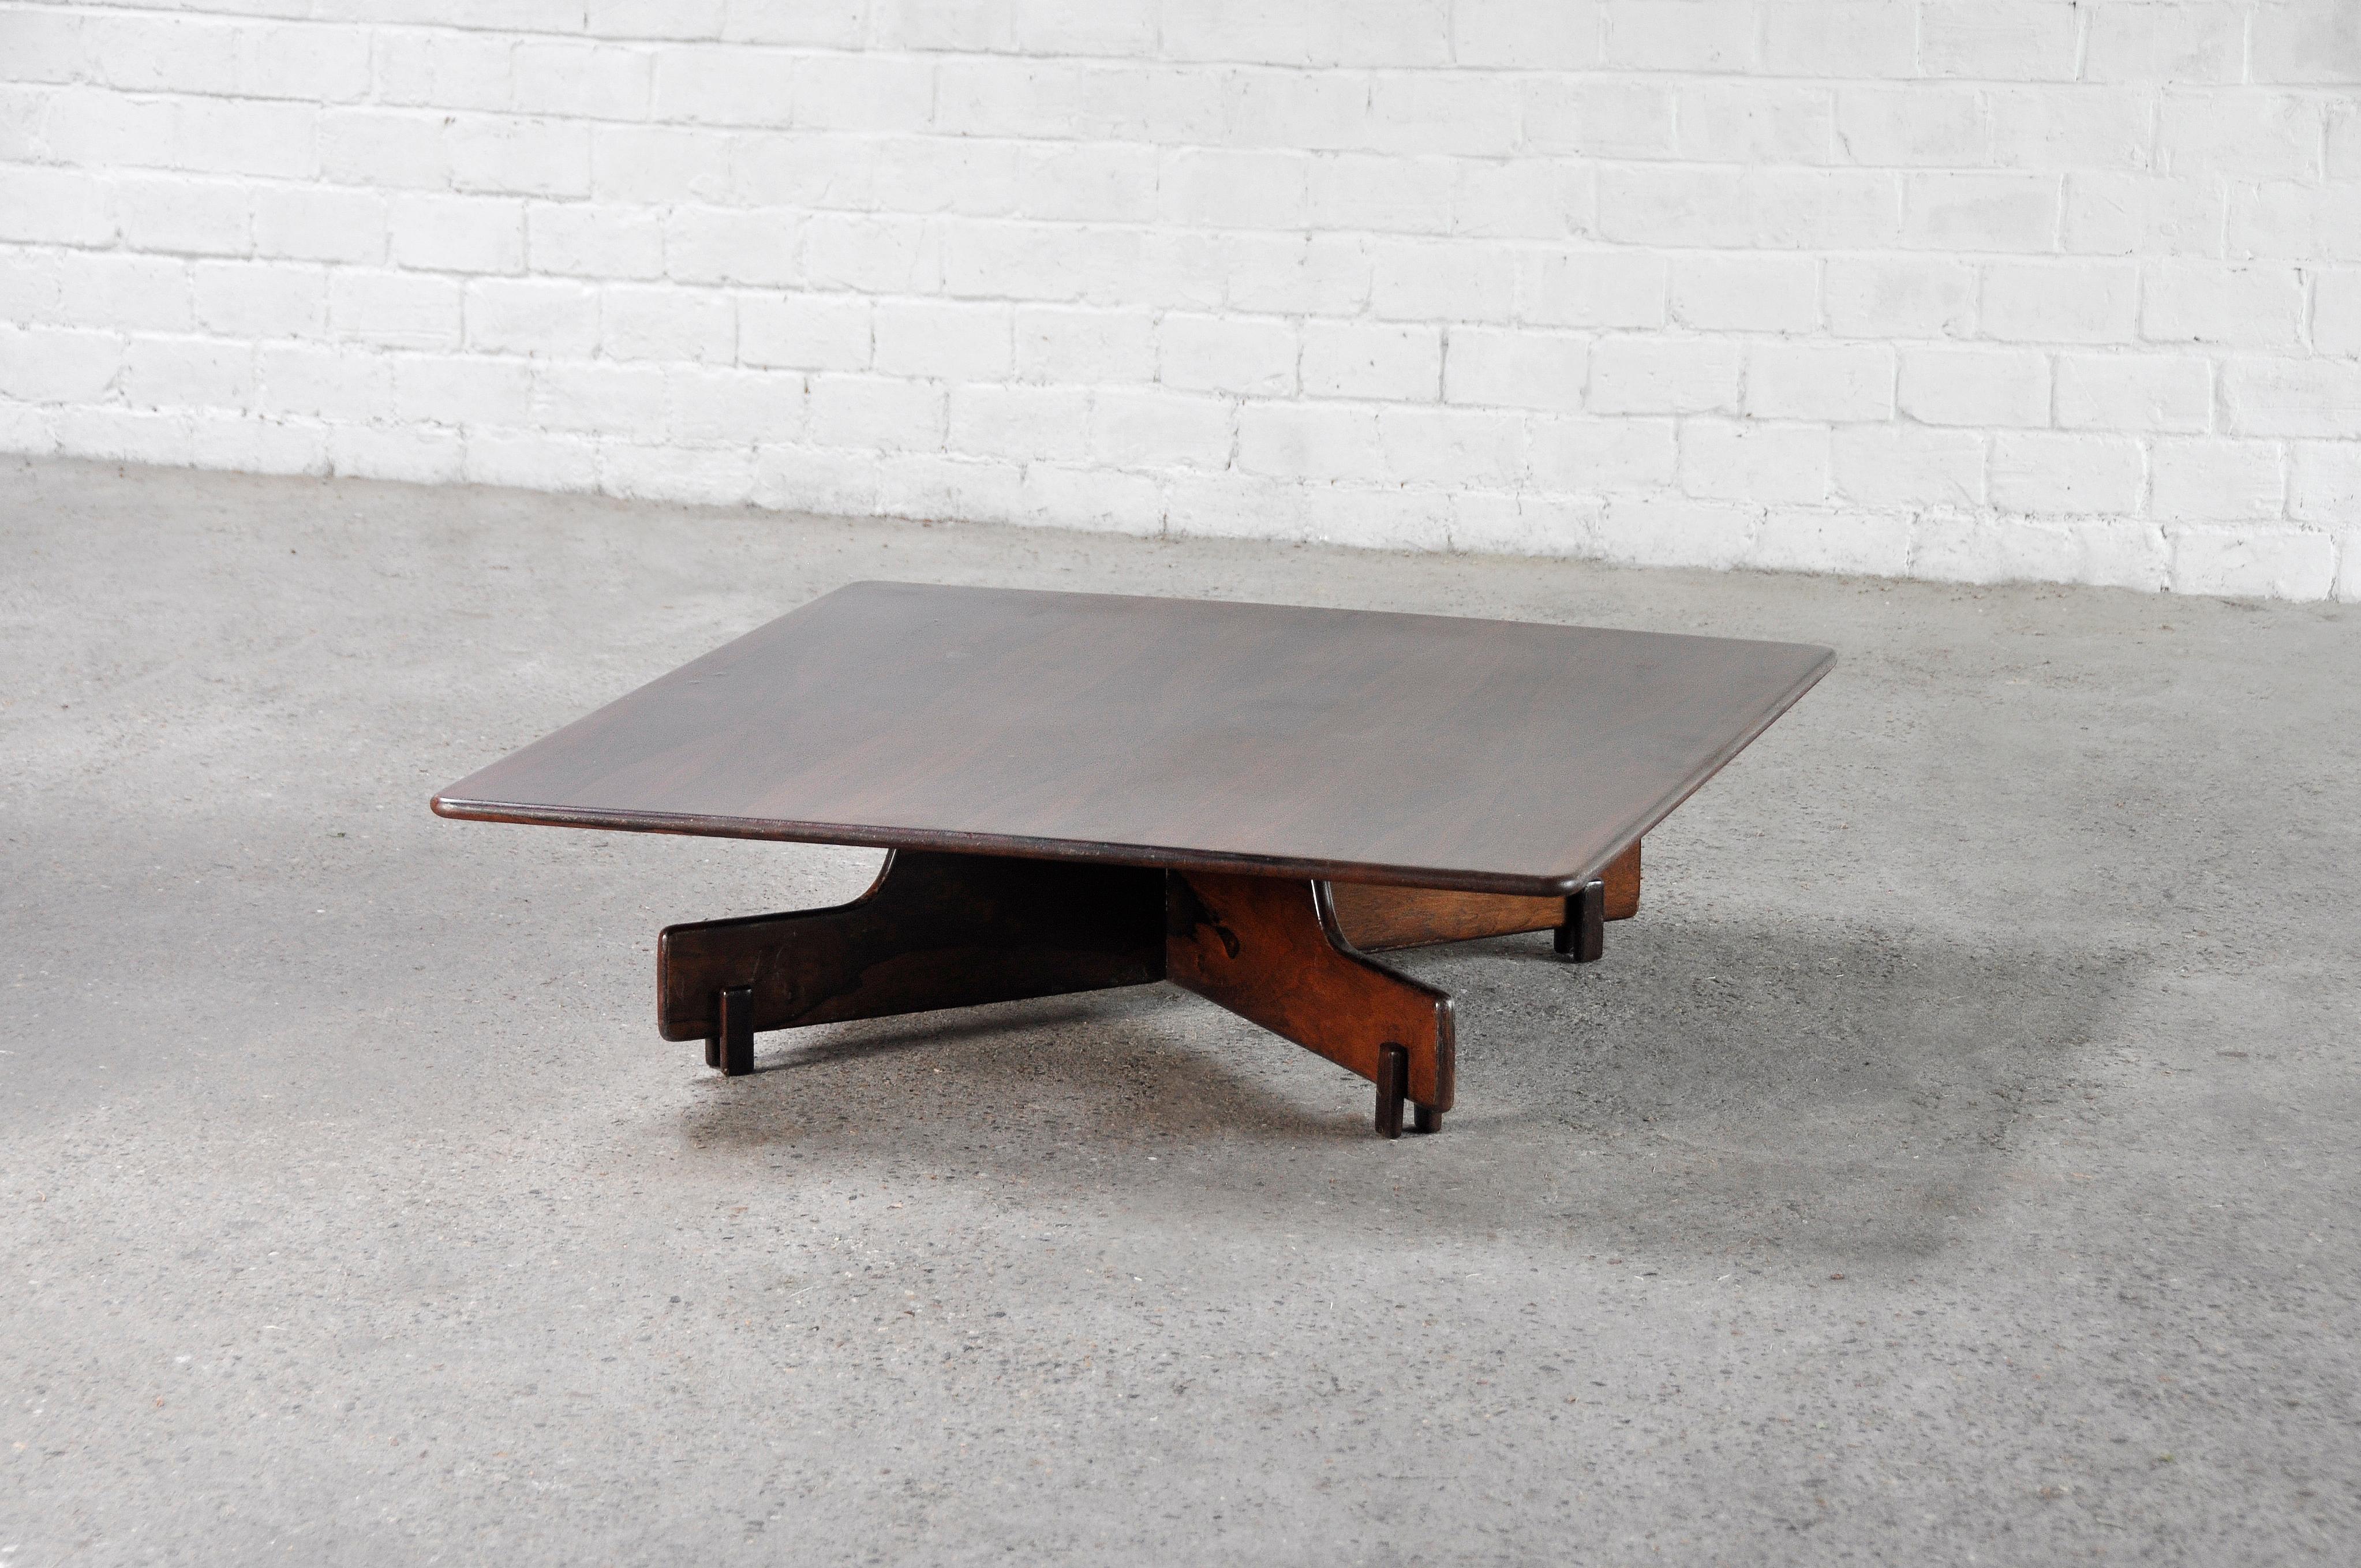 A beautiful low Brazilian coffee table in Brazilian jacaranda/rosewood veneer. This table dates to the 1960's and is attributed to Sergio Rodrigues due to its typical matching design features. The warm hue of the wood combined with its low and sleek